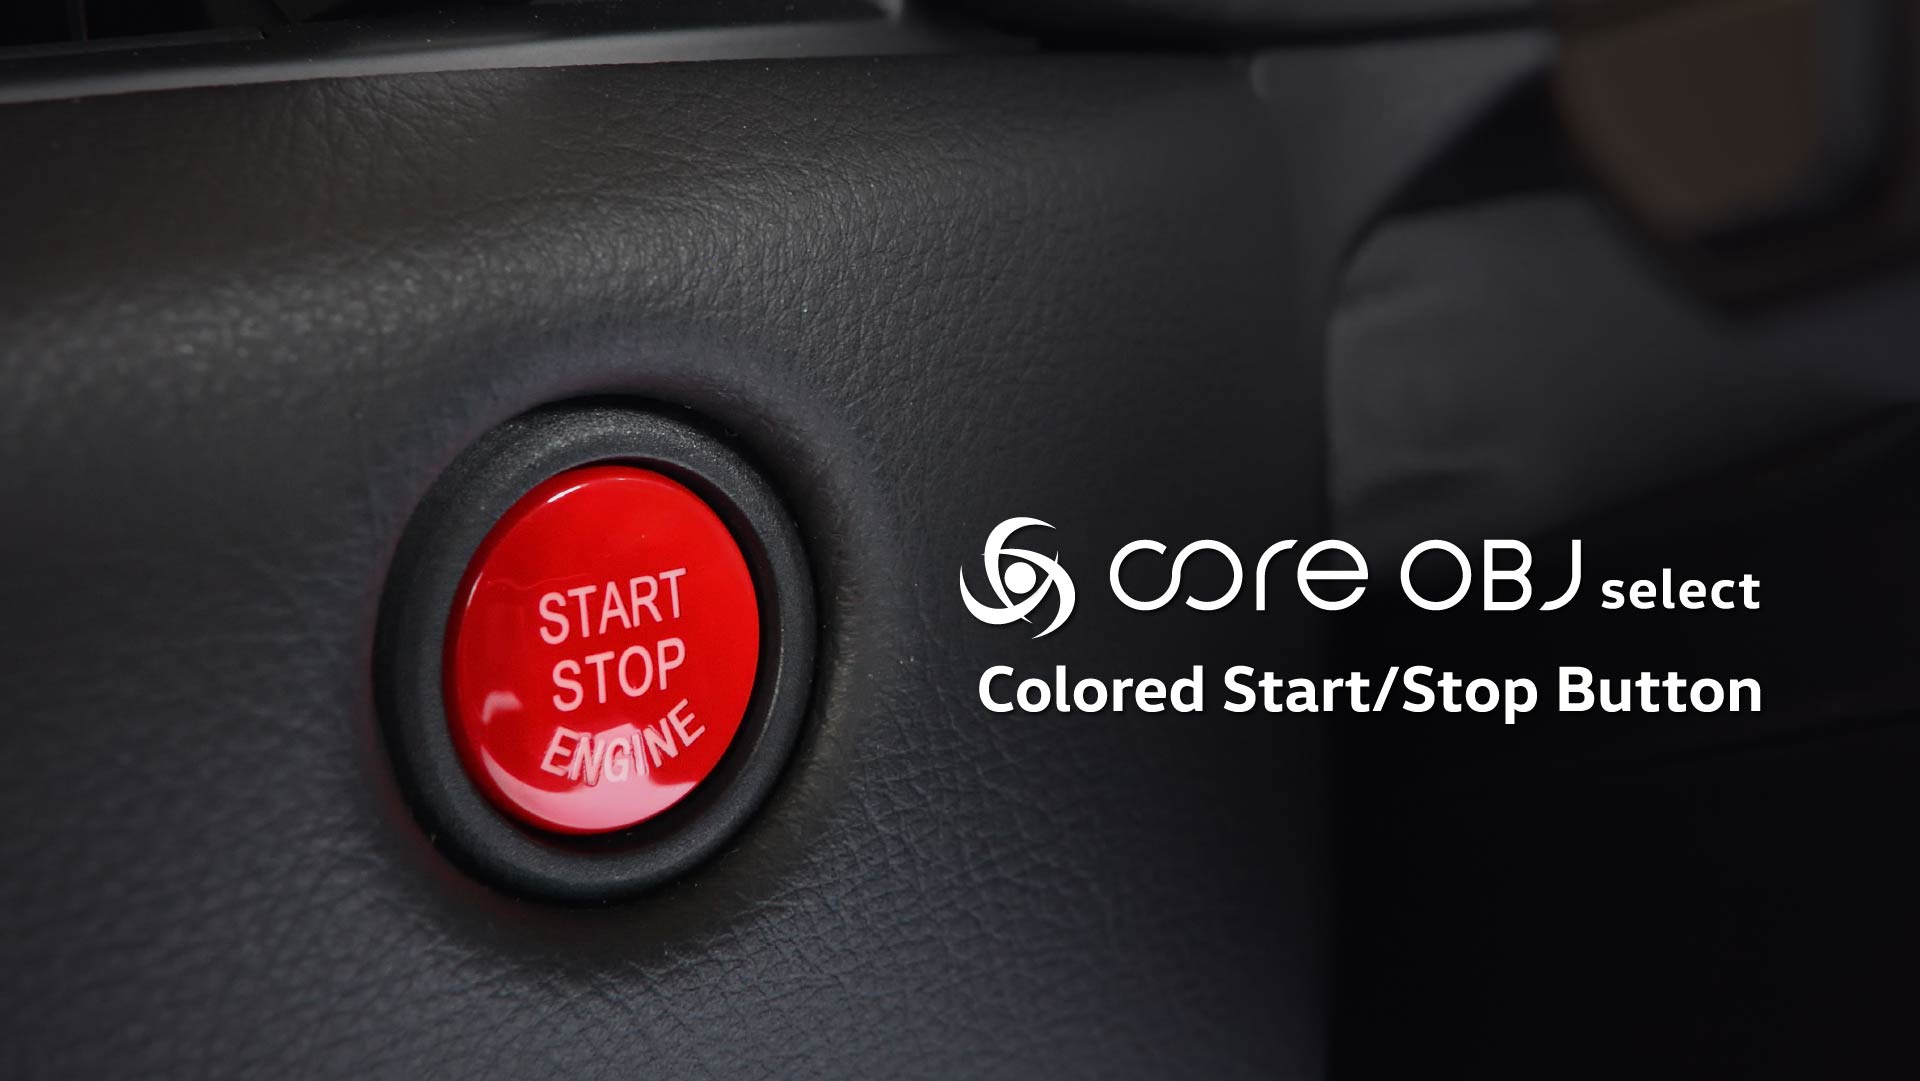 Colored Start/Stop Button / core obj select